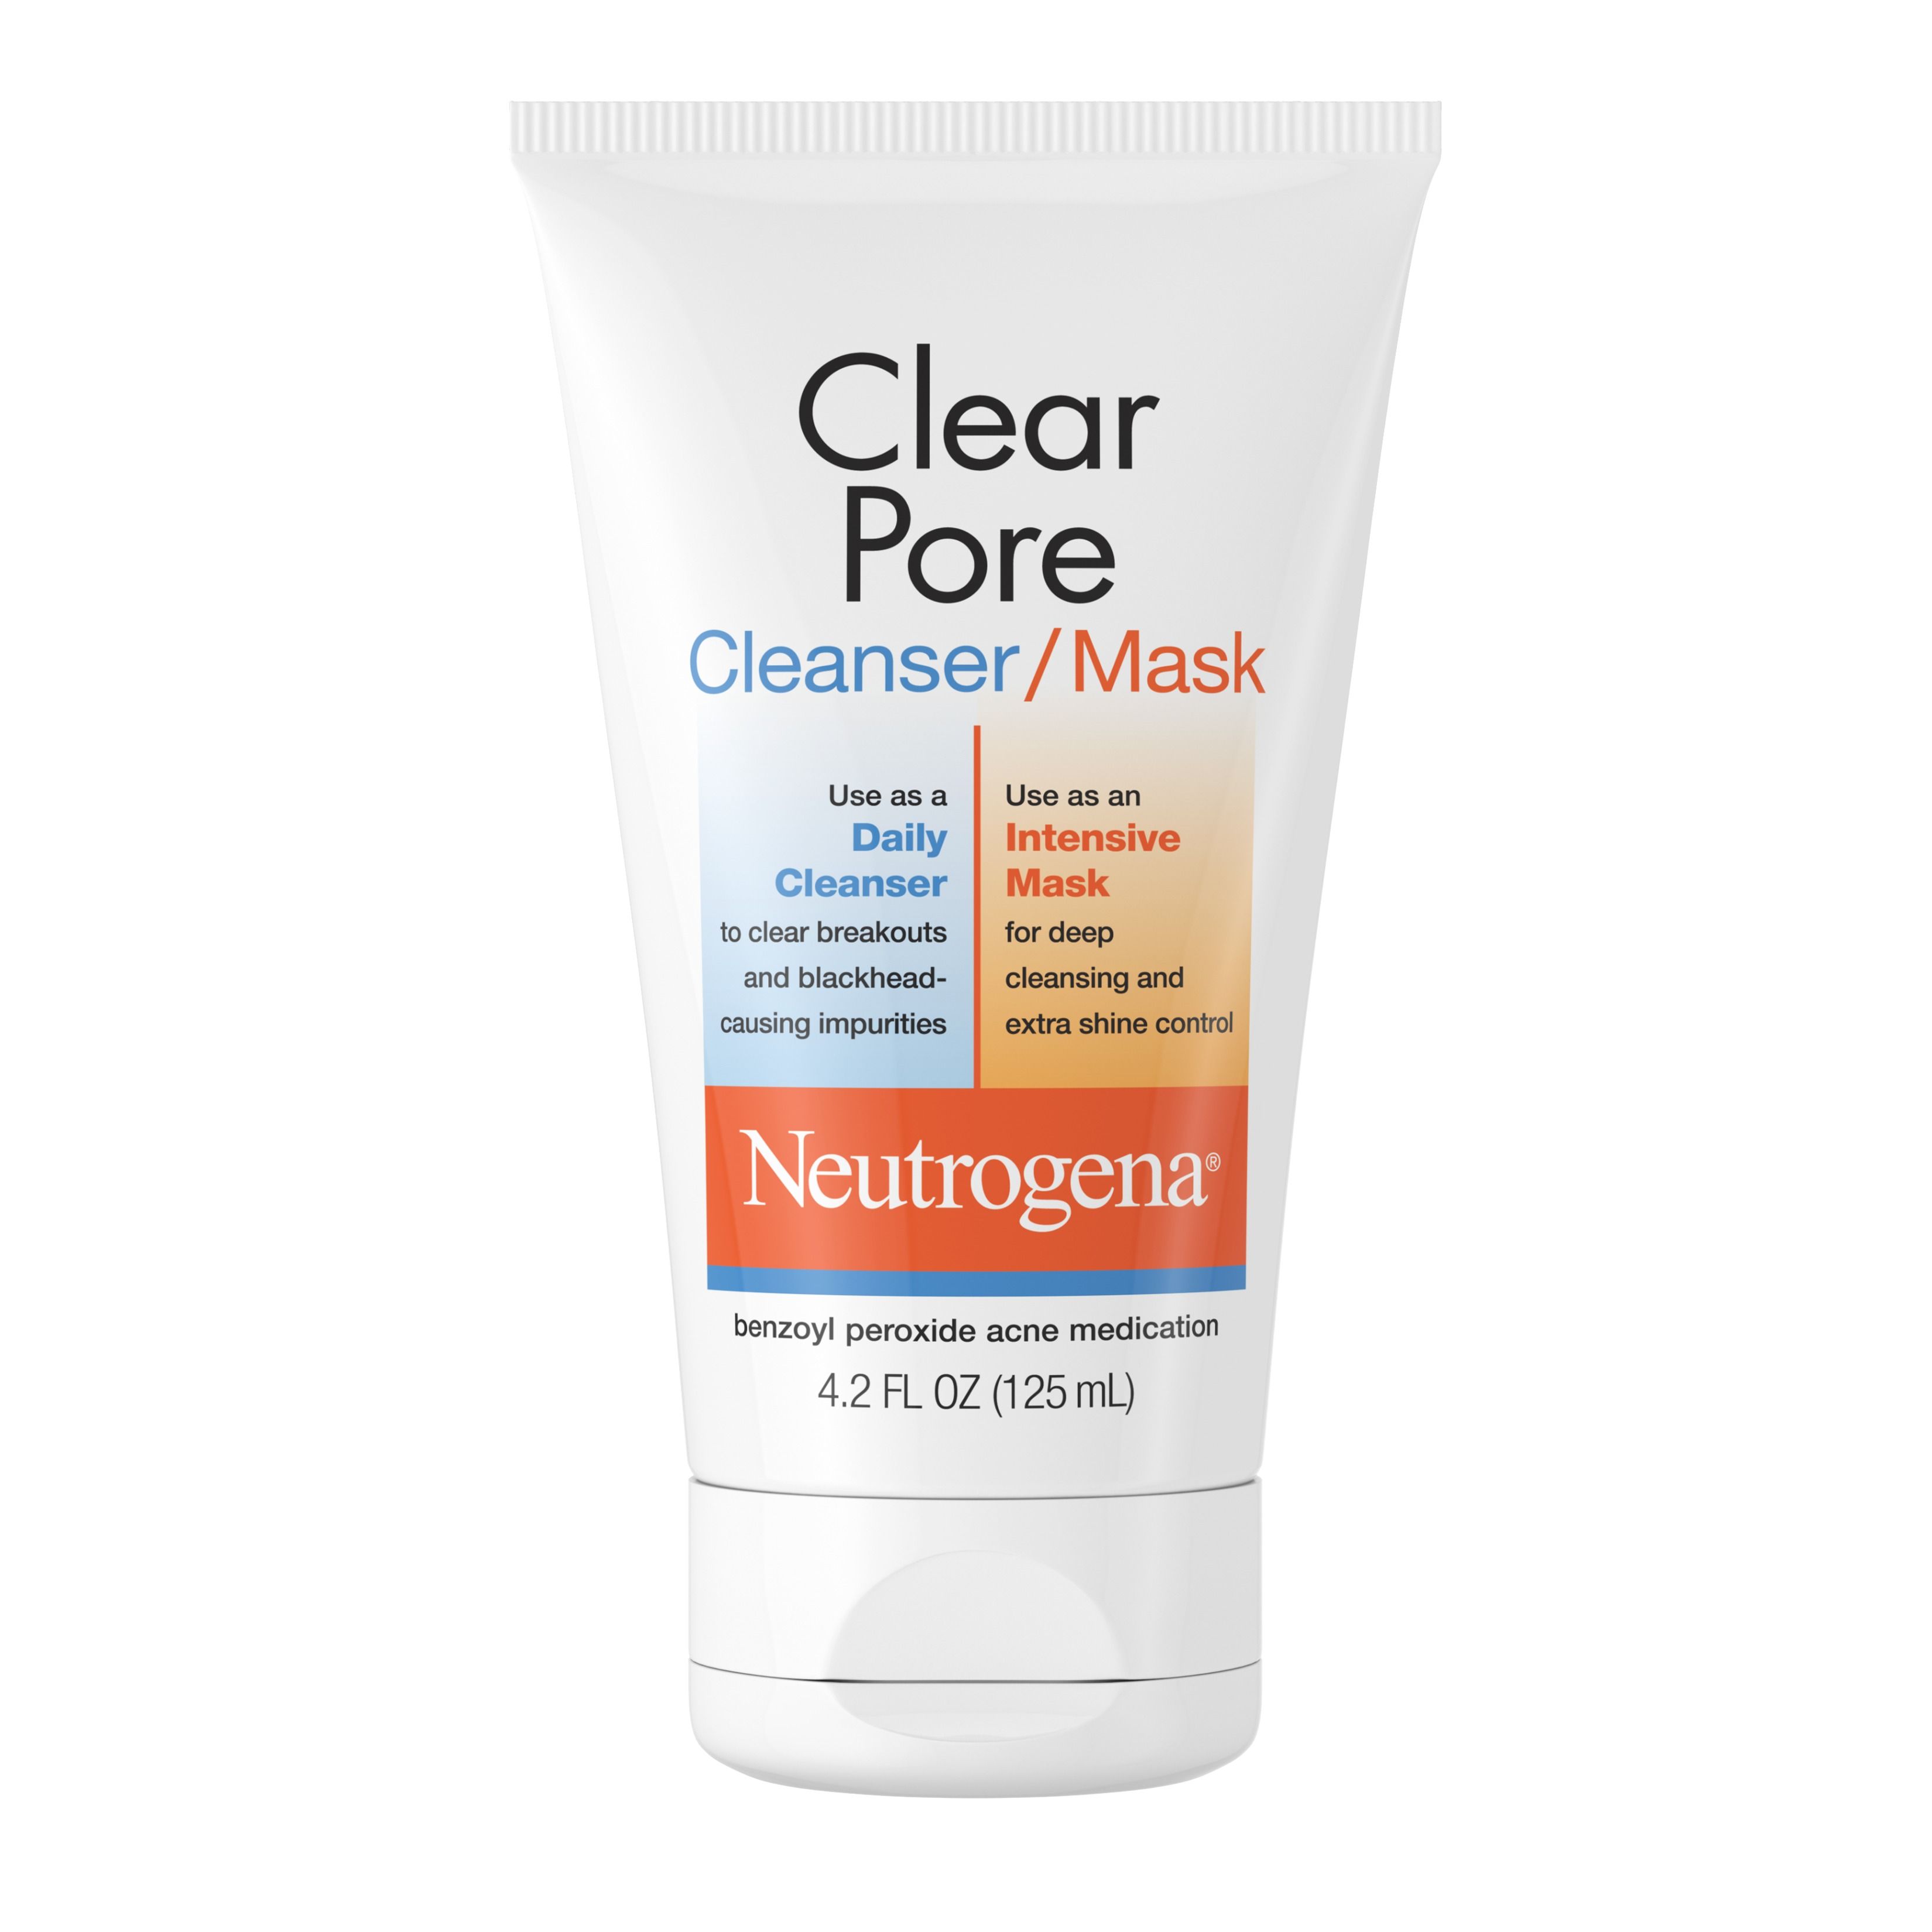 Clear Pore Cleanser Mask